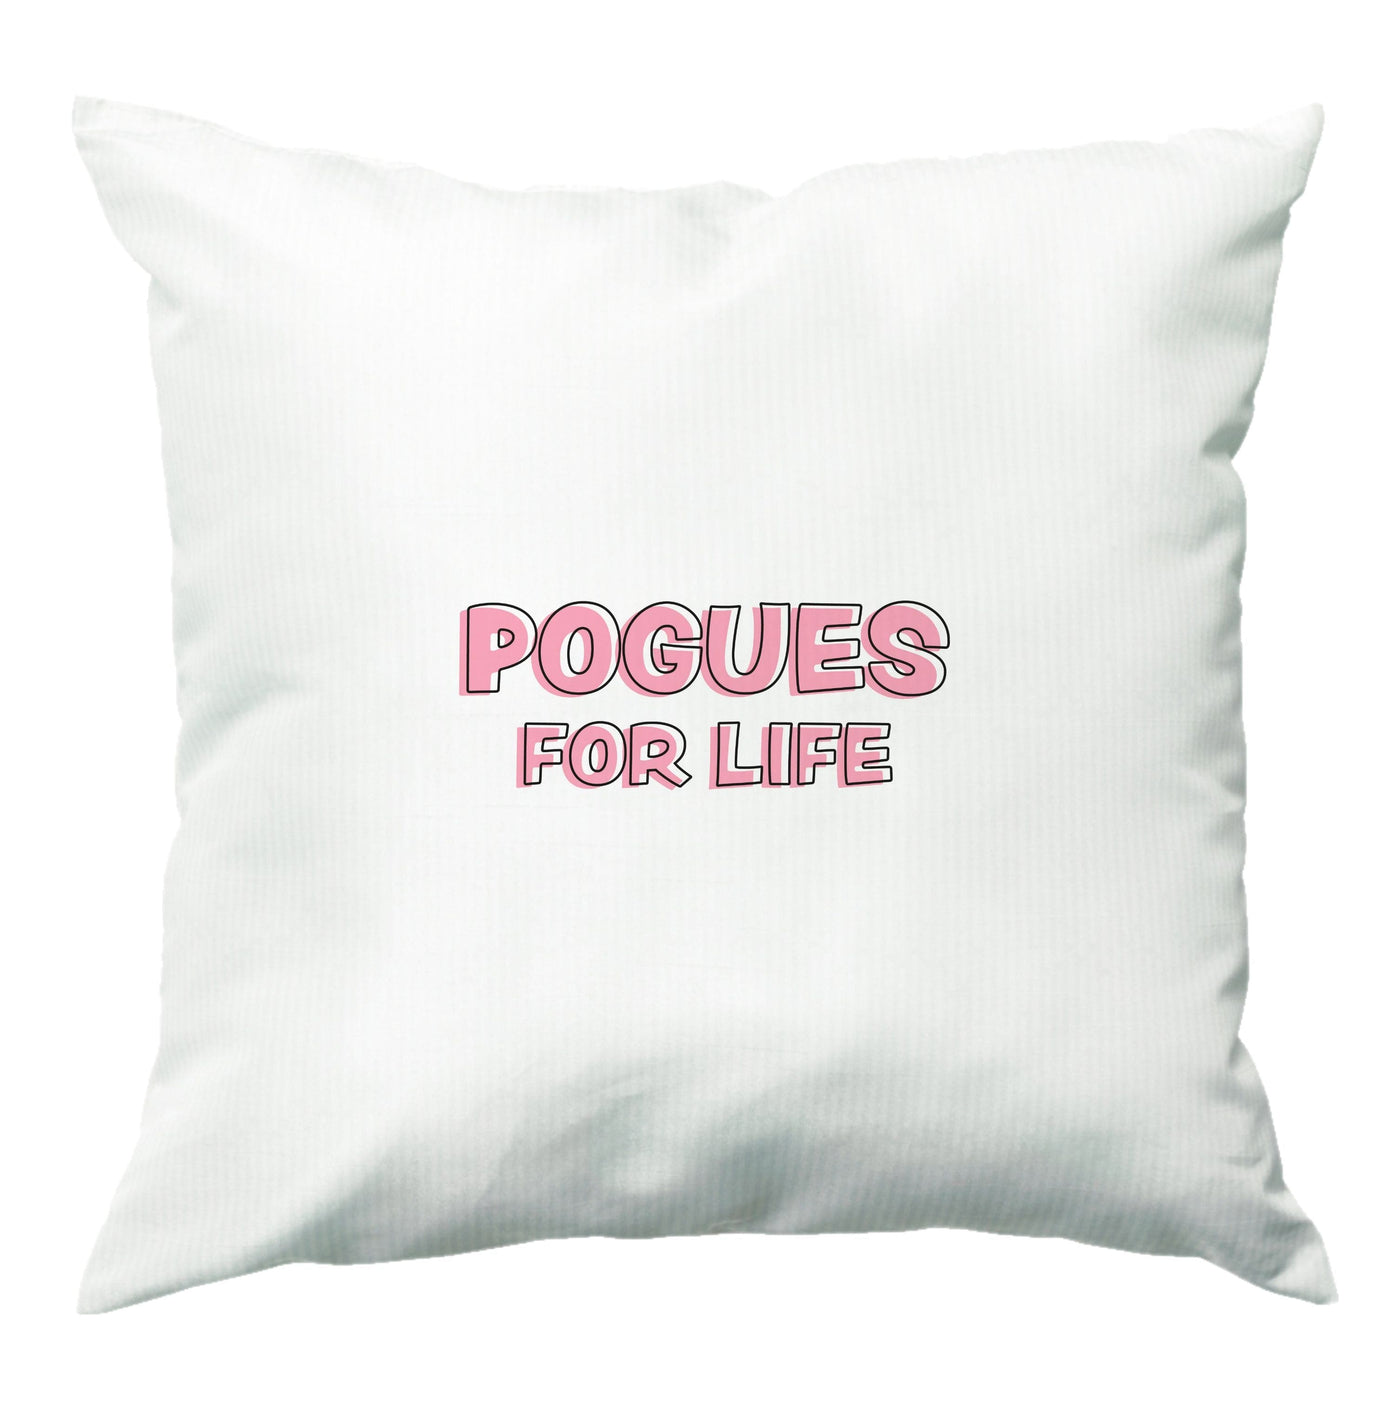 Pogues For Life - Outer Banks Cushion